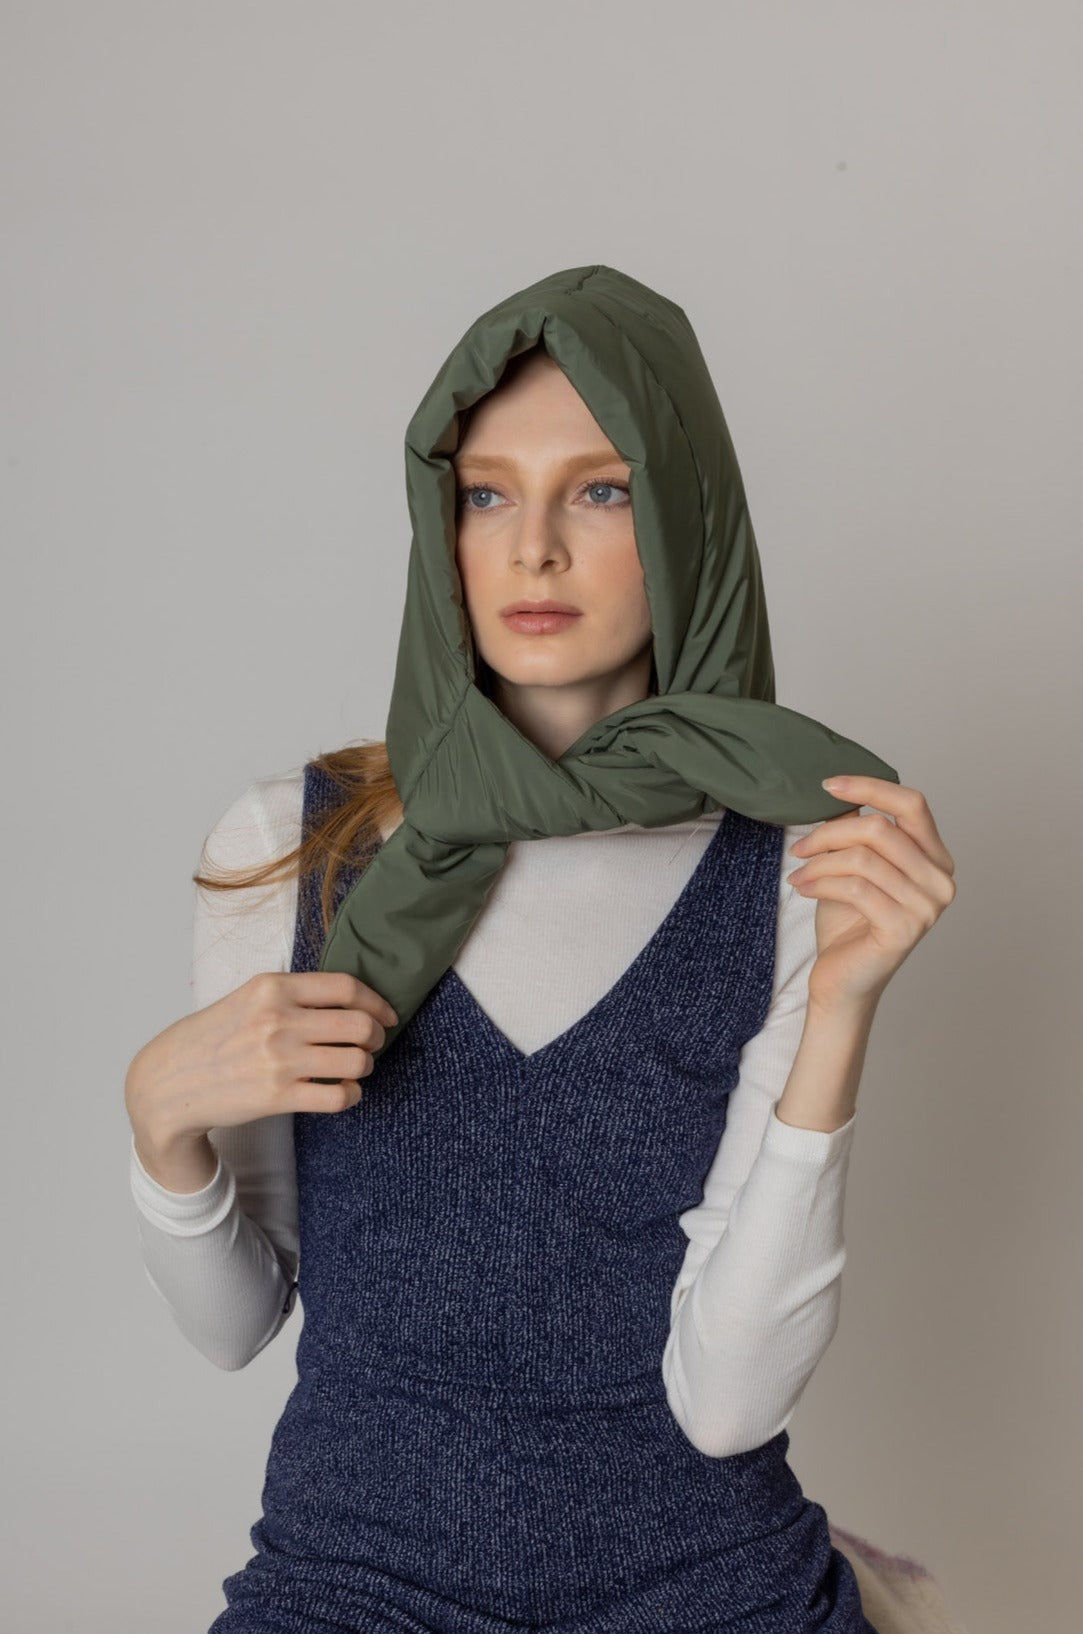 Padded Snood With Tie